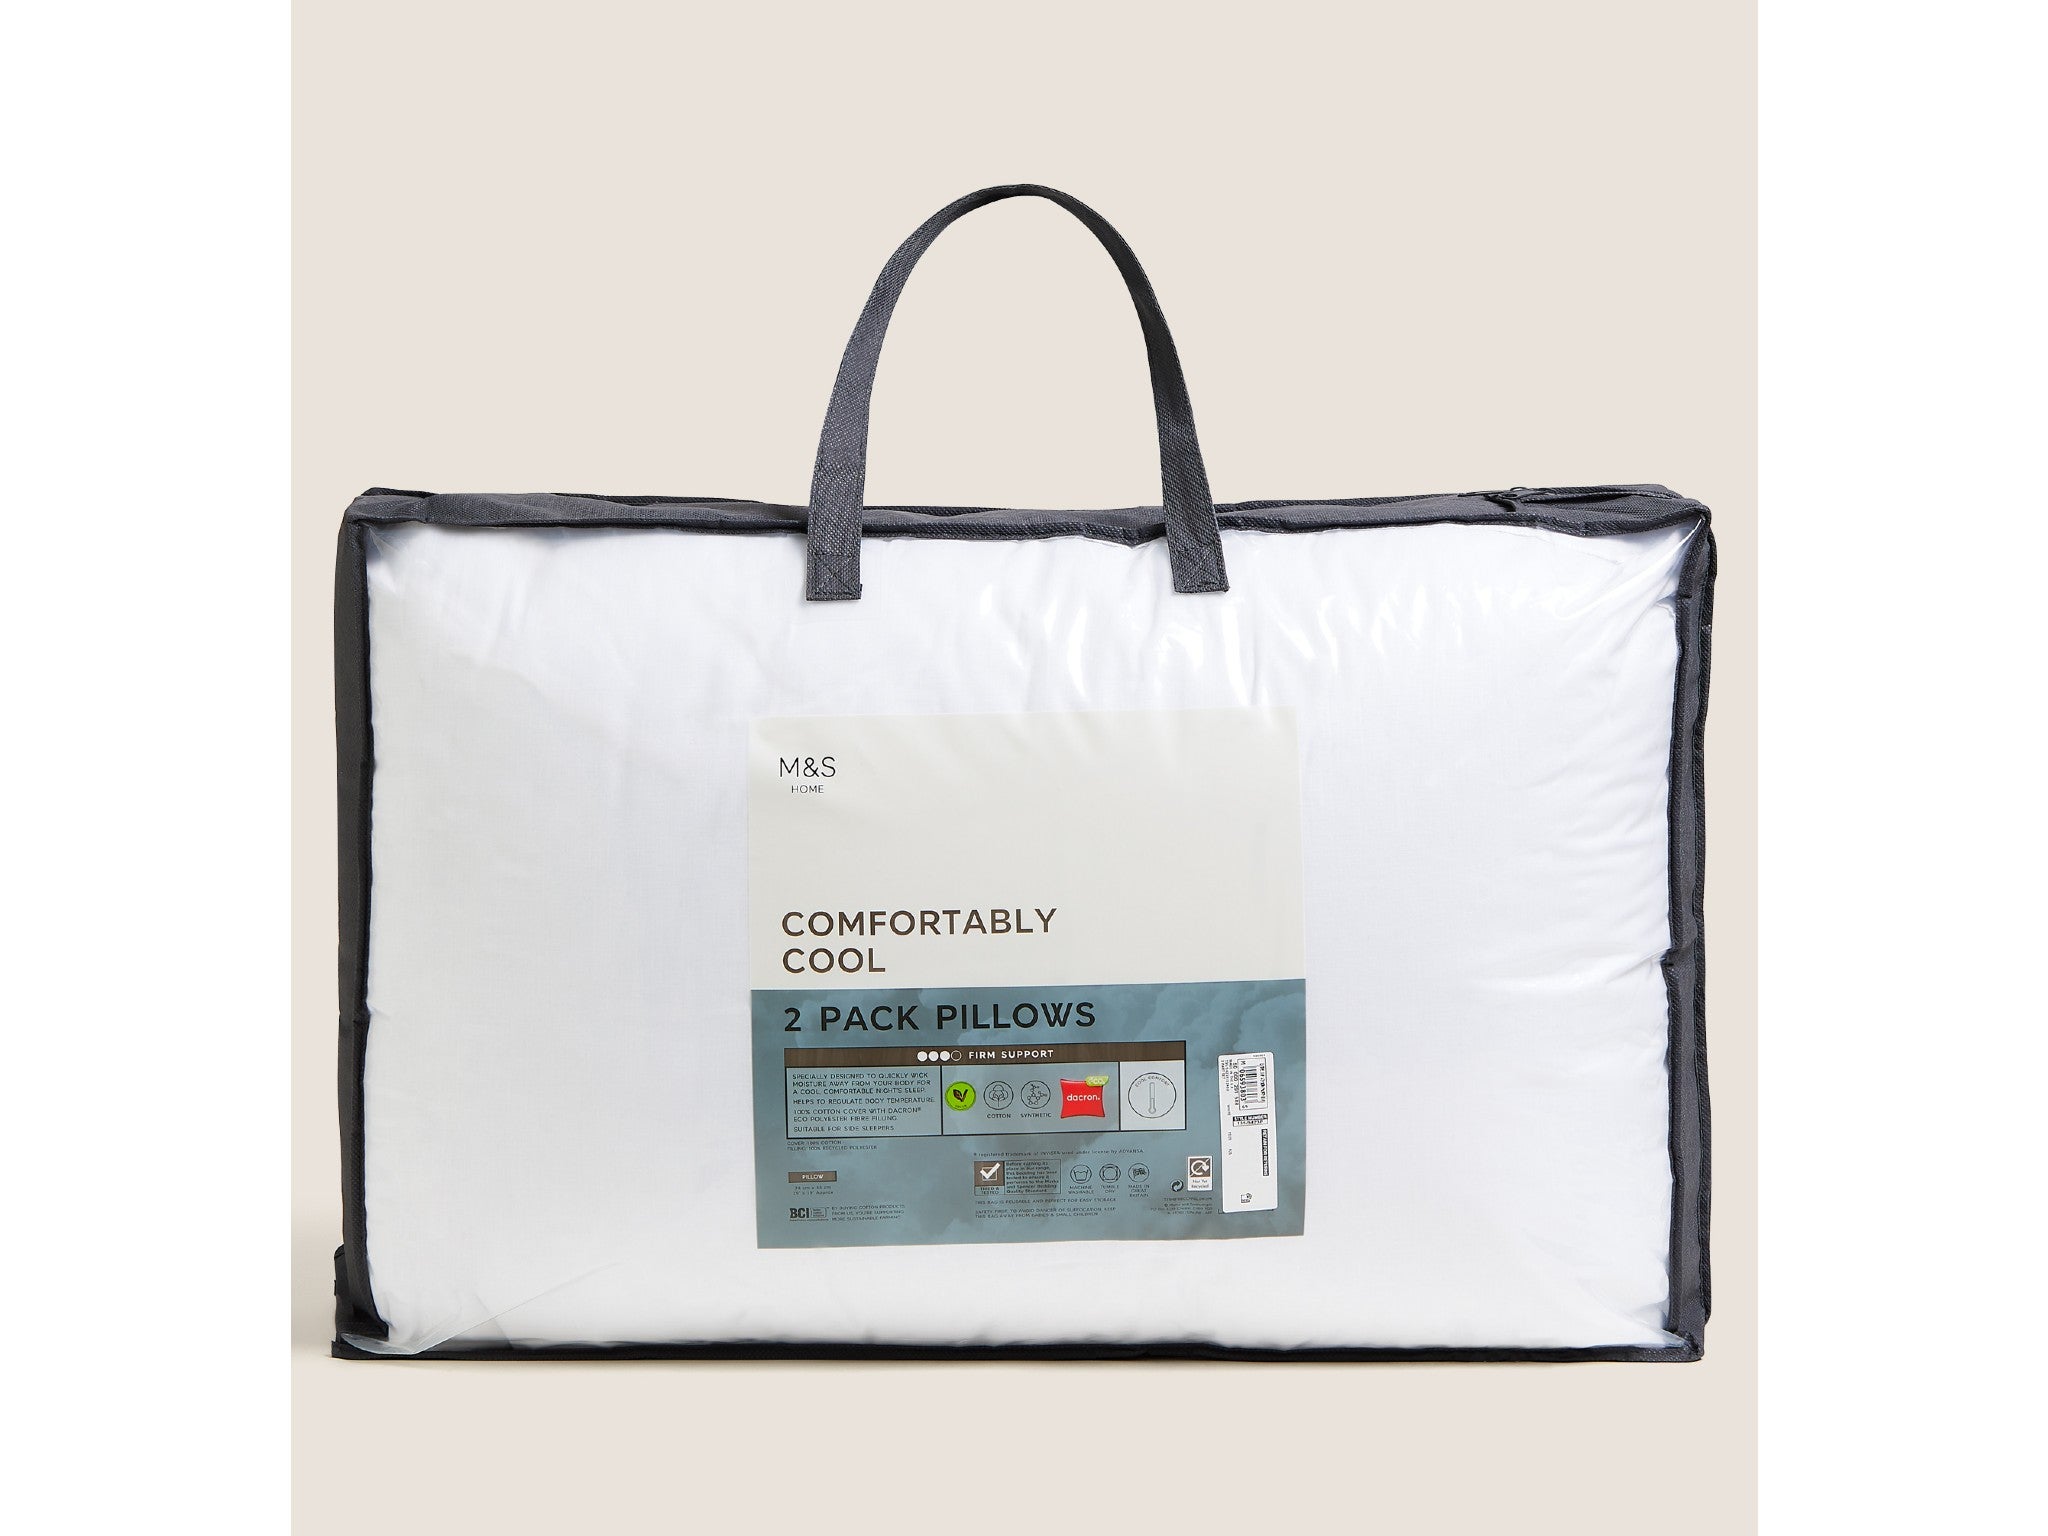 M&S 2 pack comfortably cool pillows indybest